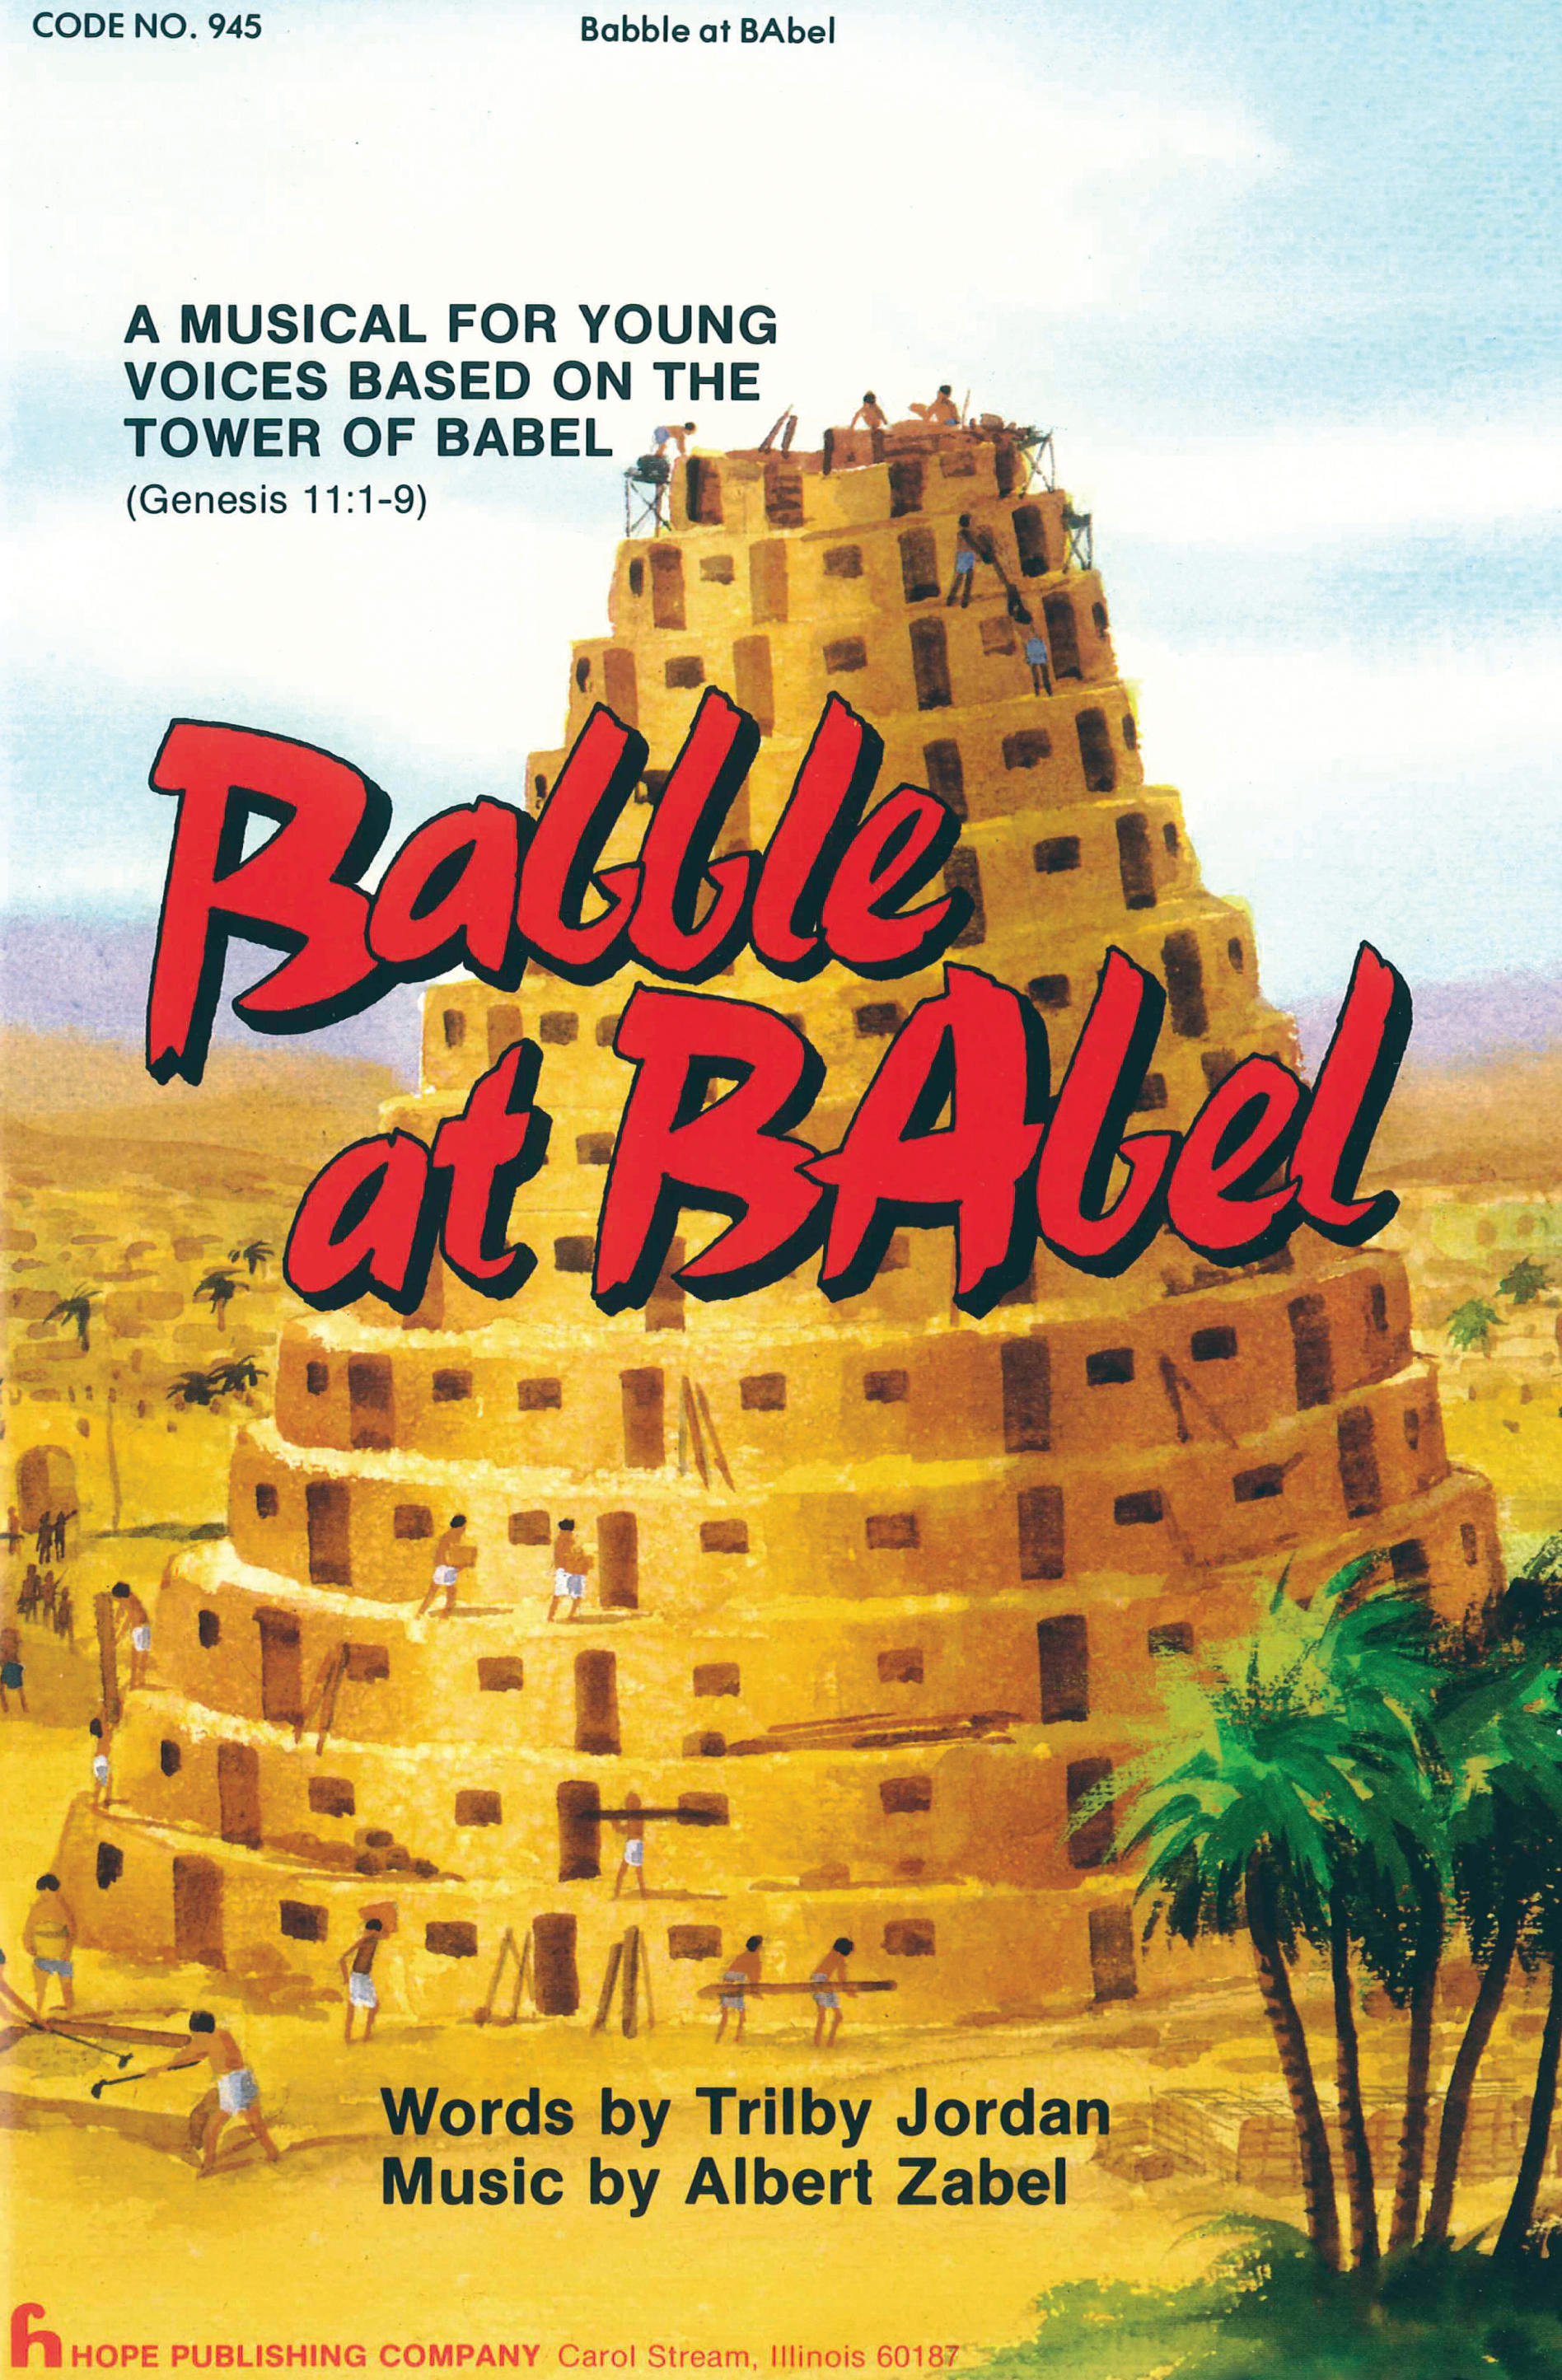 Babble at Babel - Score Cover Image